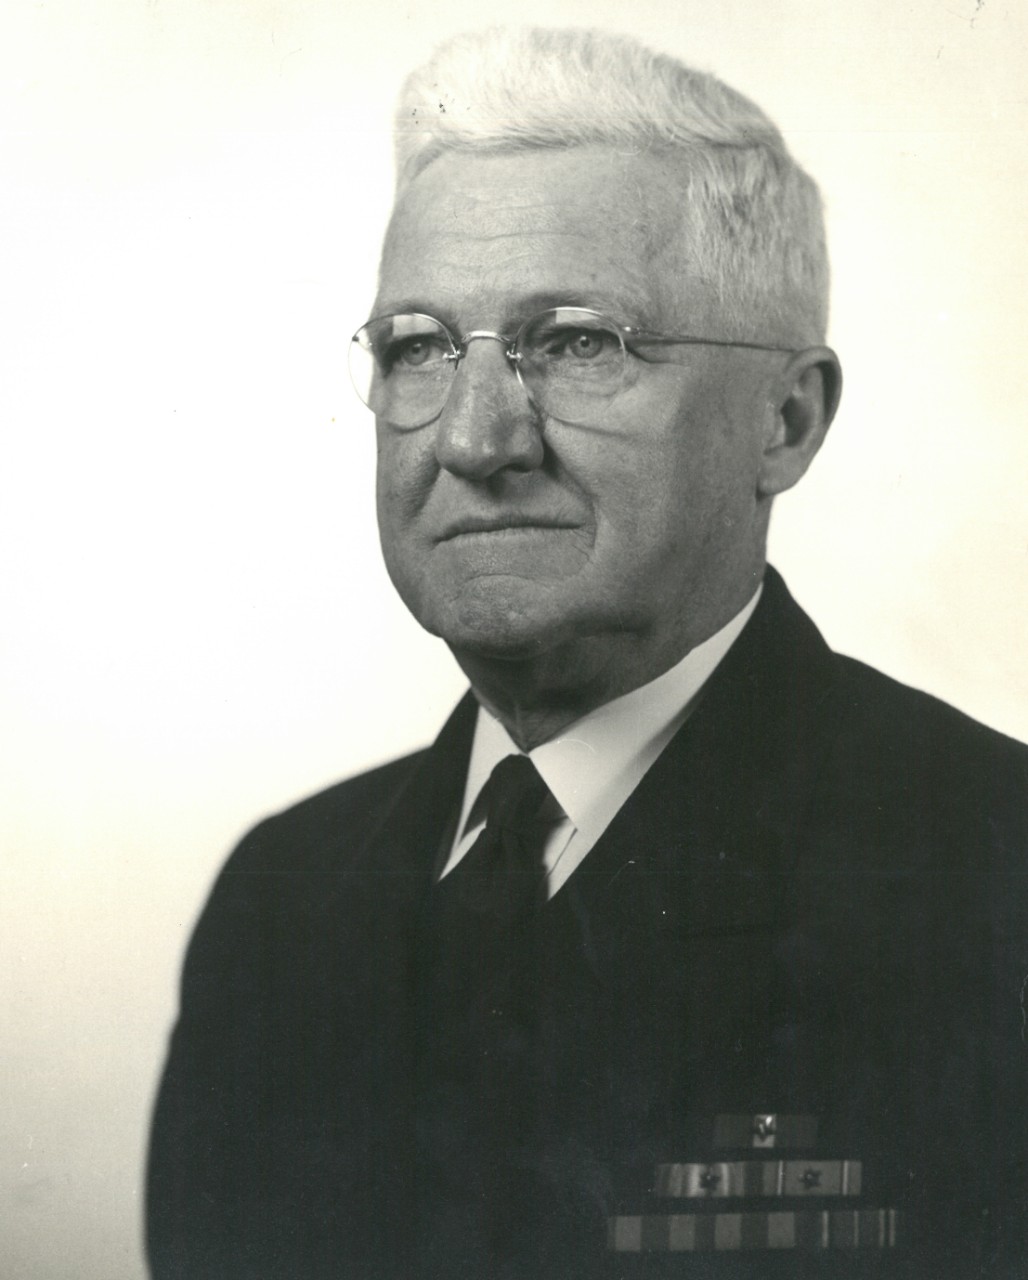 This portrait of Stark later in life keenly shows his care worn countenance and reflective gaze, January 1951. (Public Affairs Office, NAS Anacostia, D.C., U.S. Navy Photograph 1-51, Biography Collection, Naval History and Heritage Command)